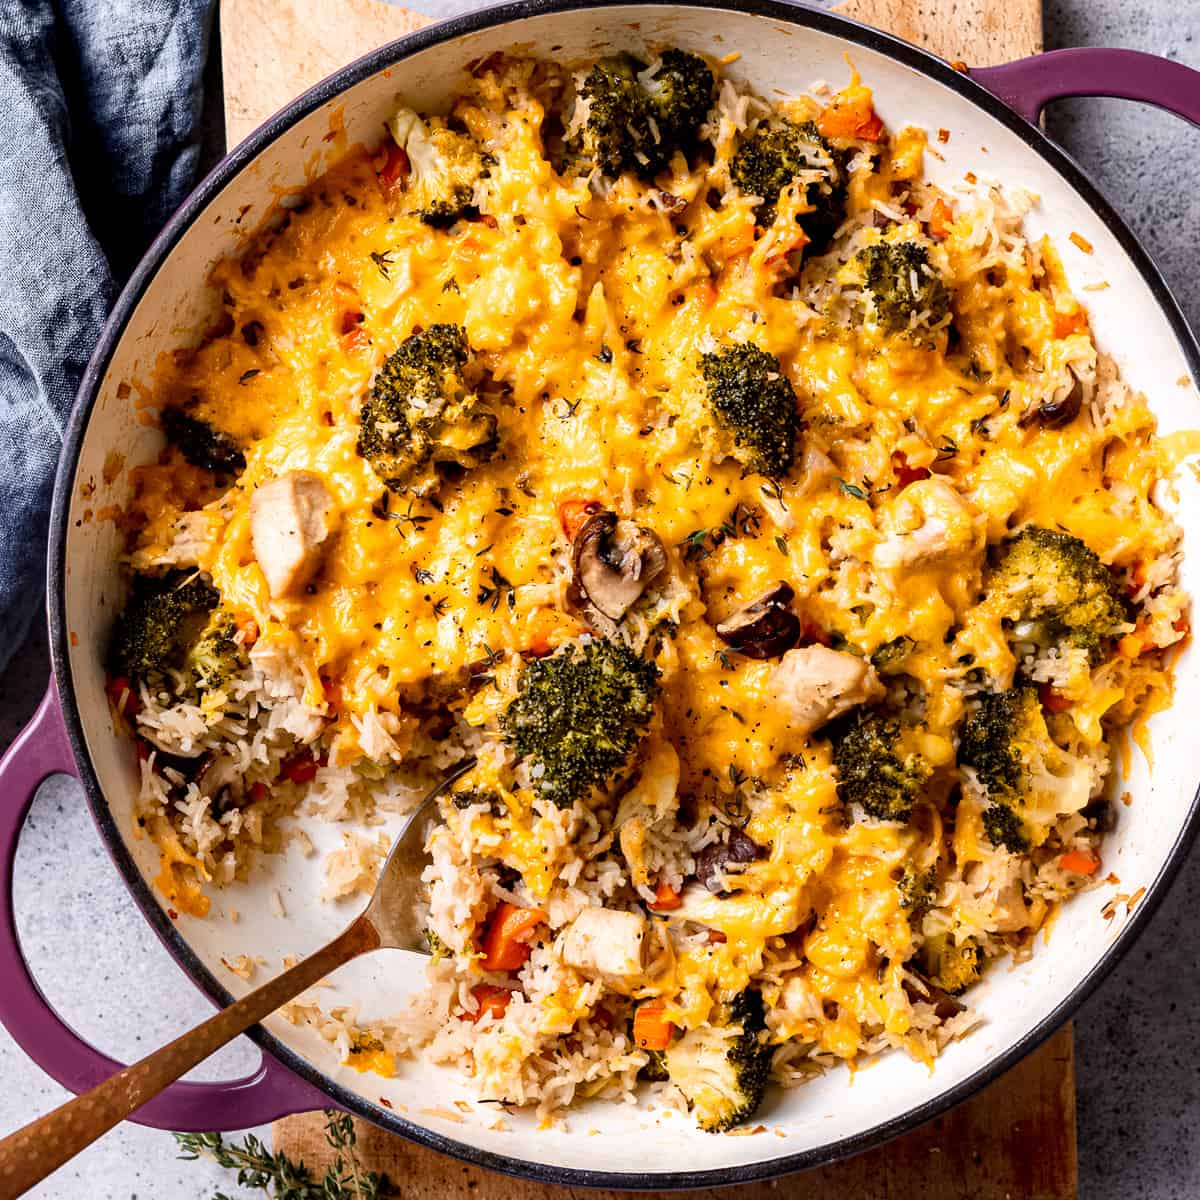 Cheddar topped chicken and broccoli casserole with cheese.